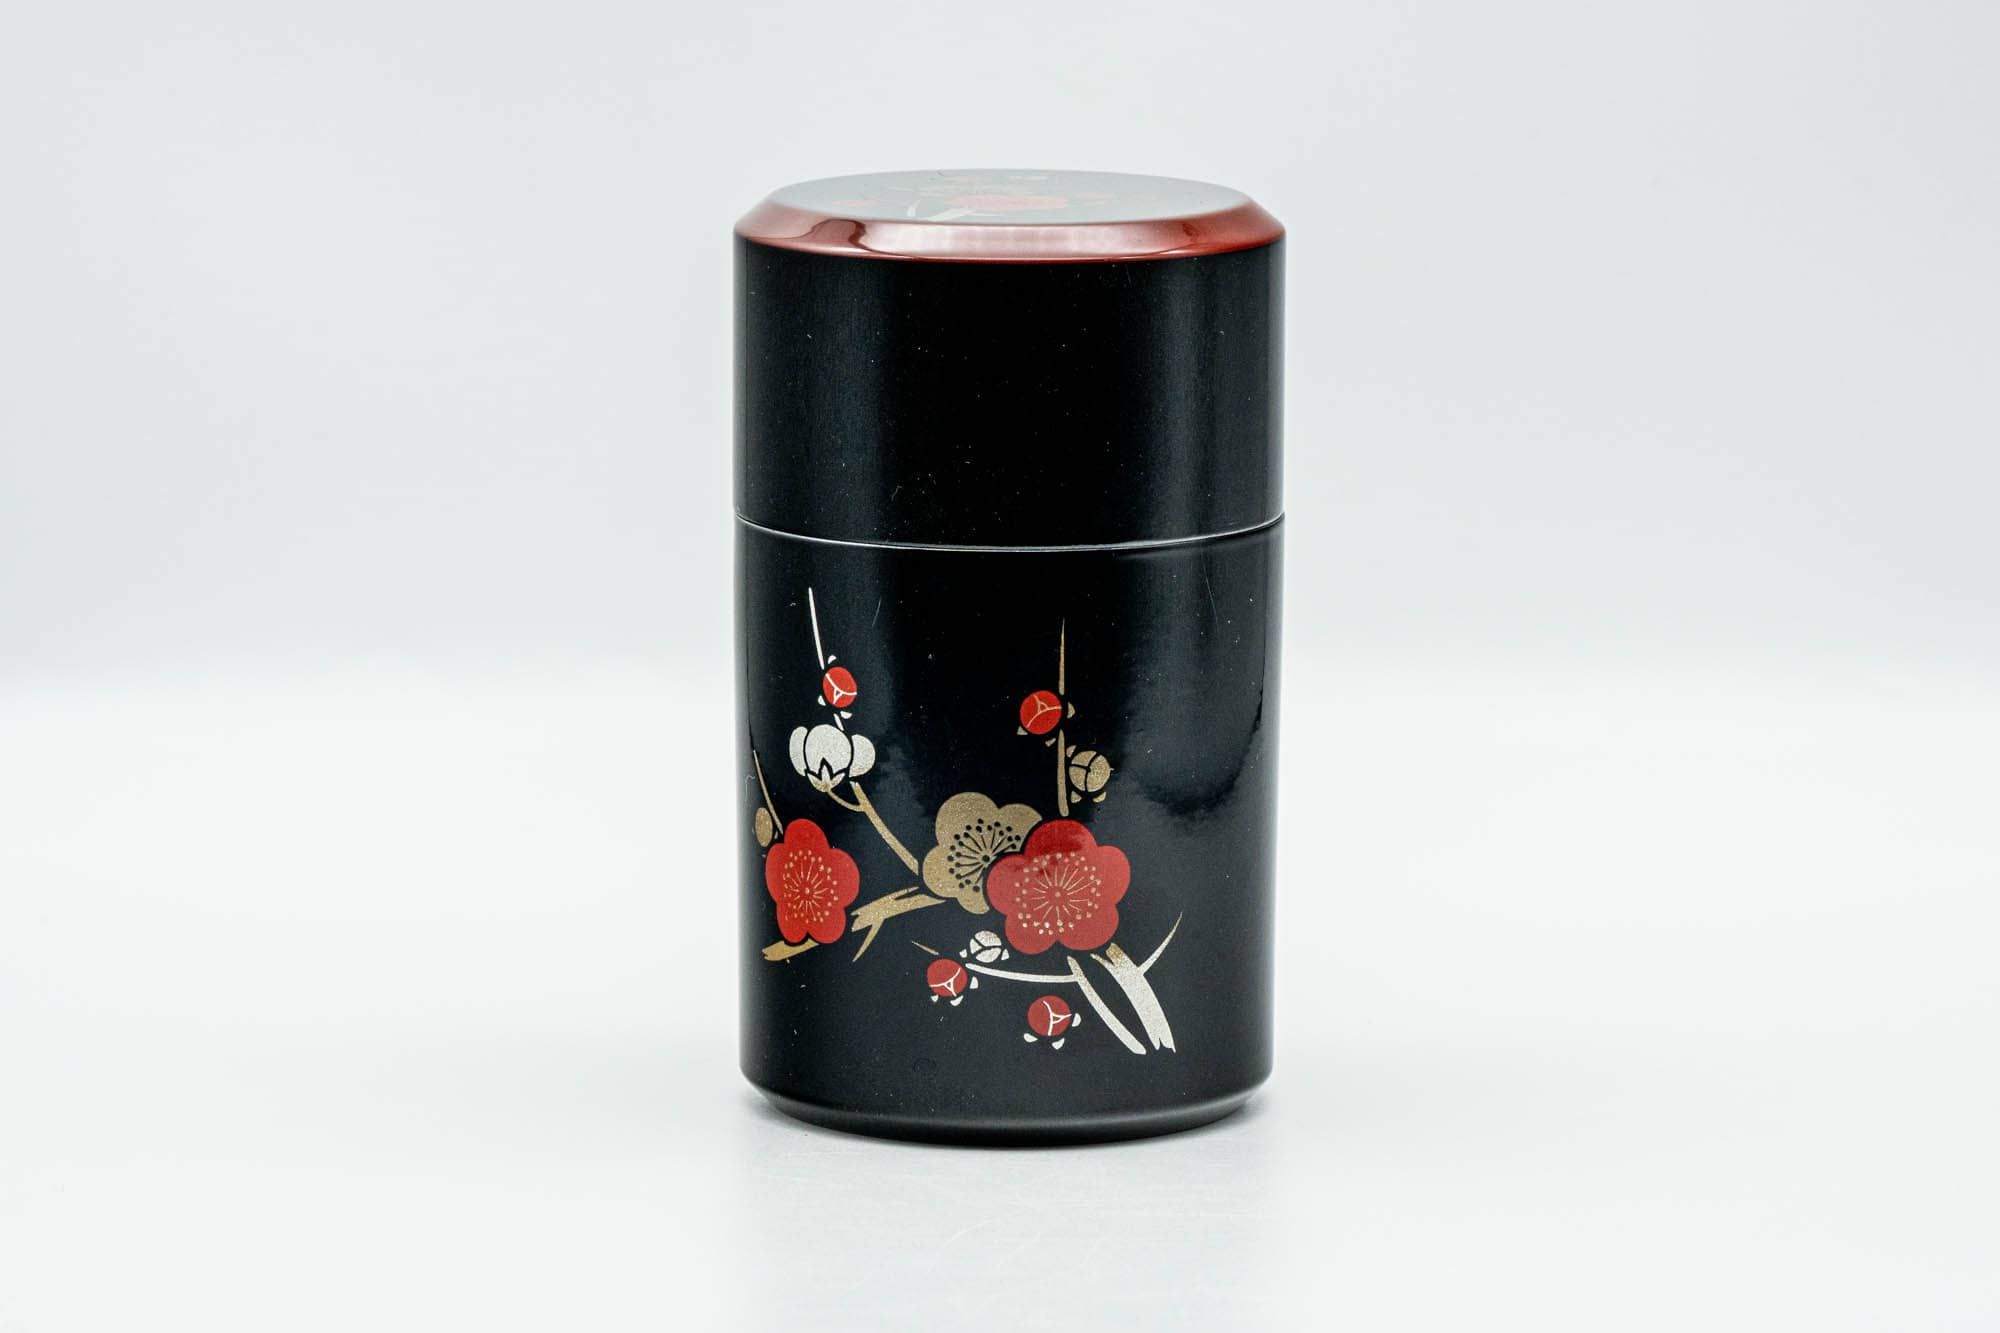 Japanese Chazutsu - Floral Black Lacquer Tea Canister - 200ml